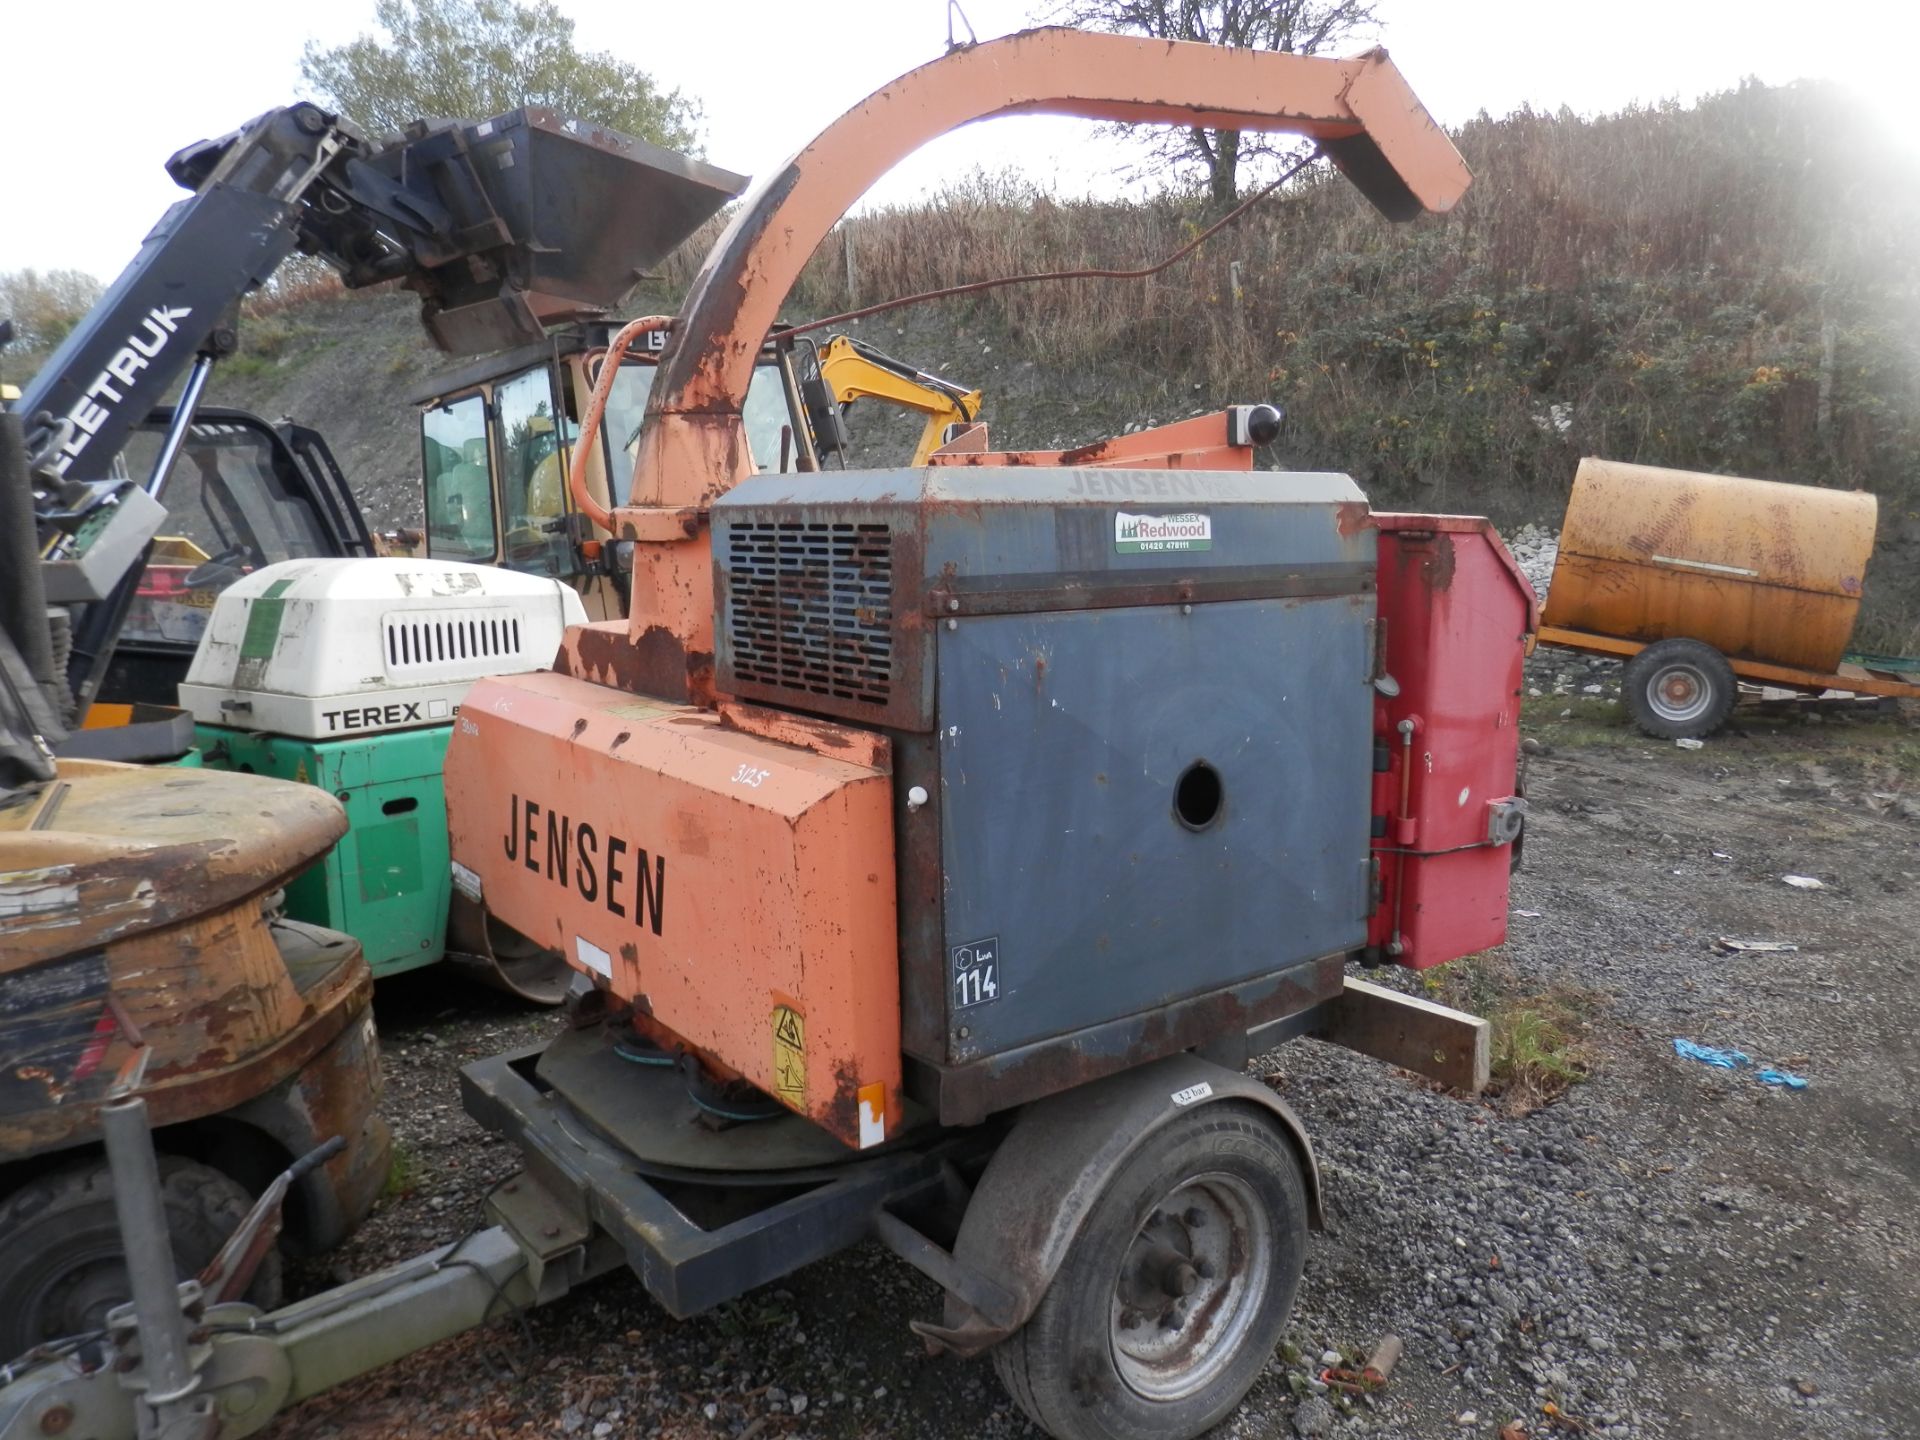 QUALITY 2004 JENSEN DIESEL TURNTABLE CHIPPER, GOOD WORKING ORDER - Image 5 of 8